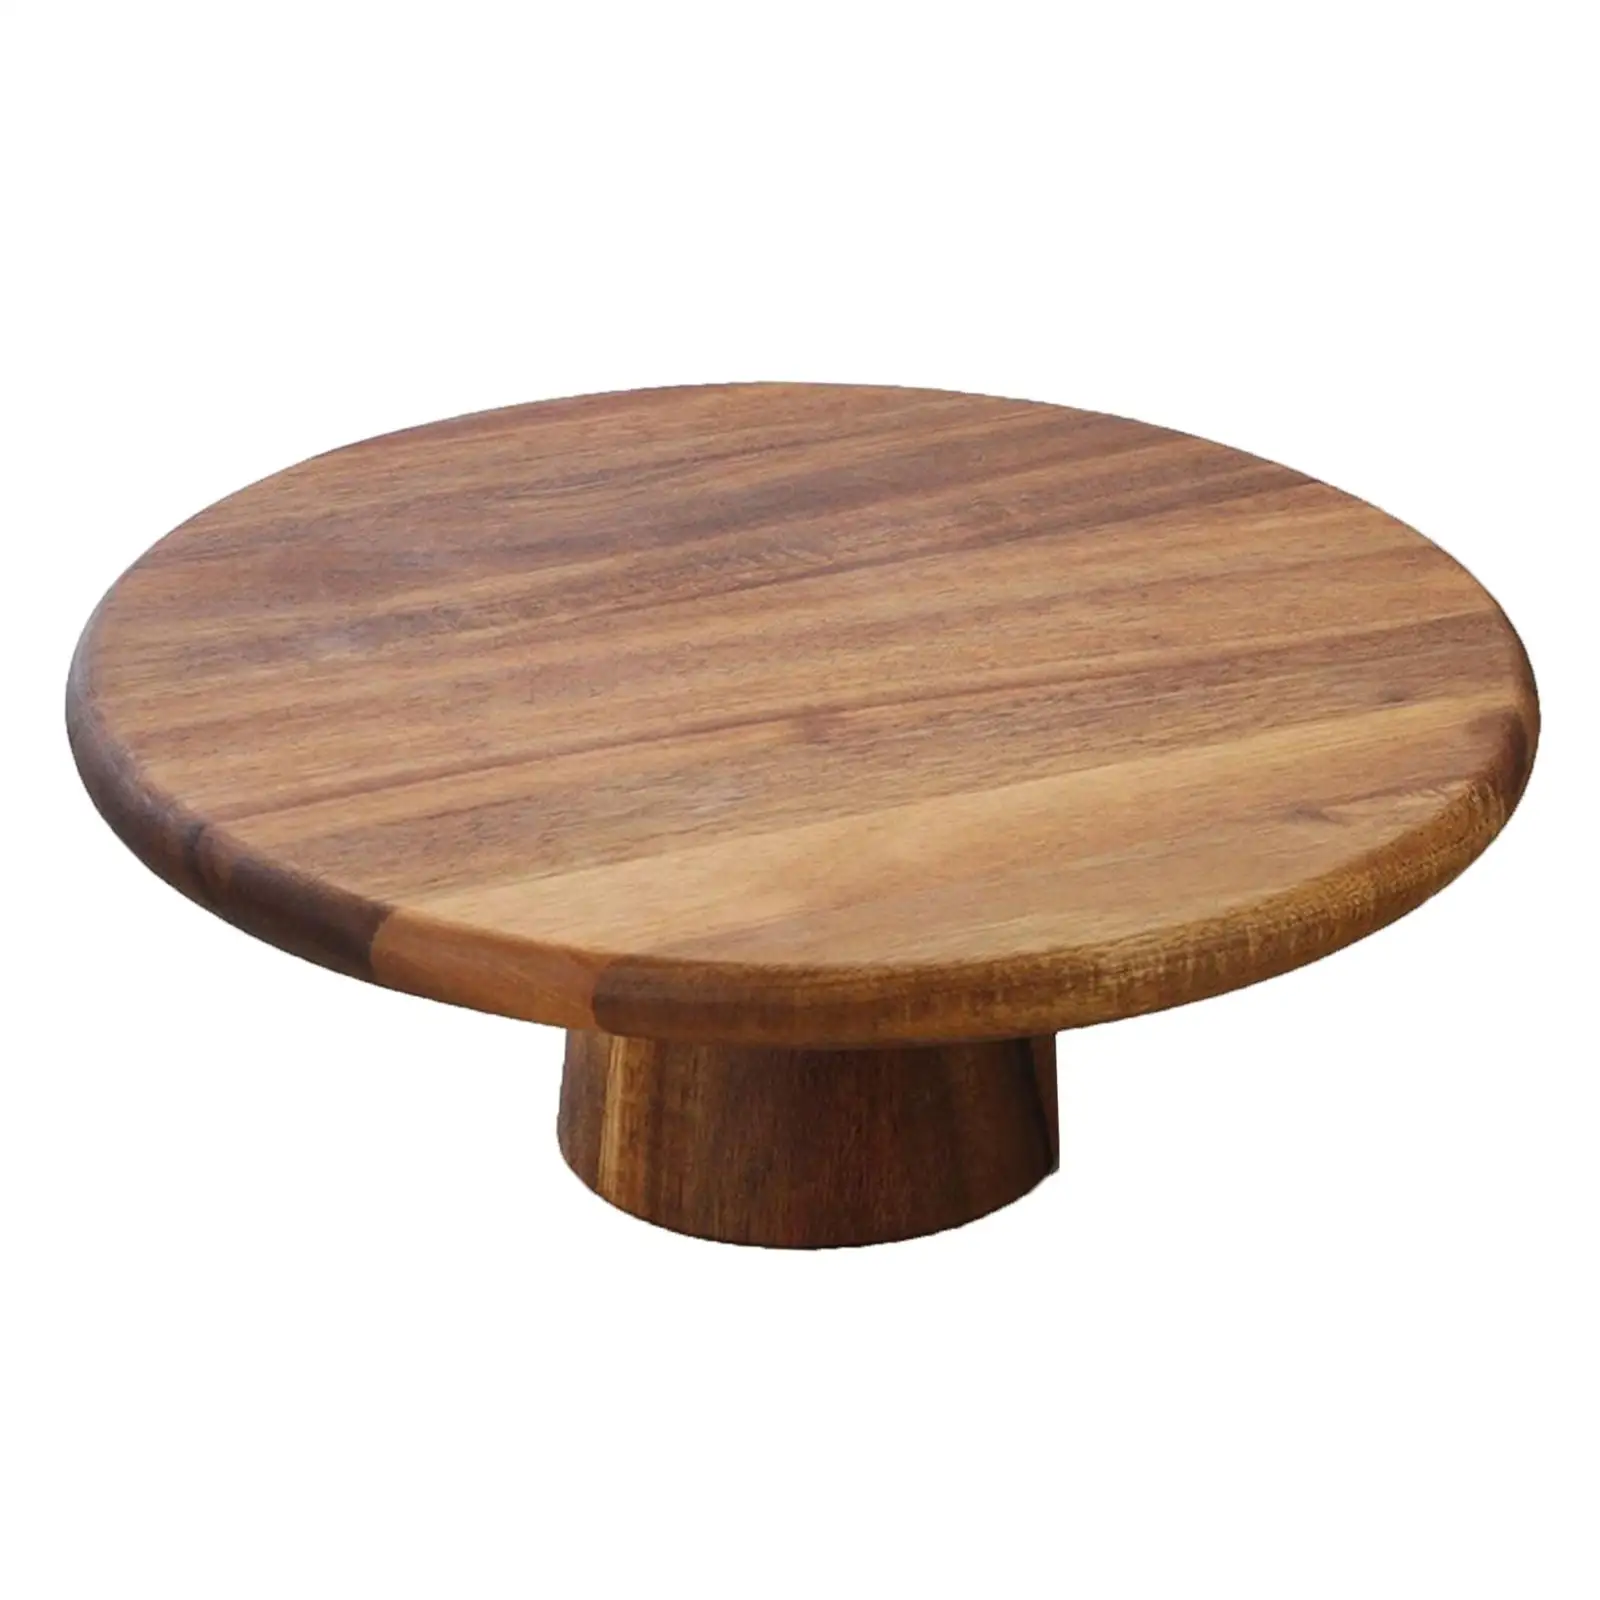 Wood Cake Stand Dessert Display Plate Kitchen Server Tray Round for Muffins